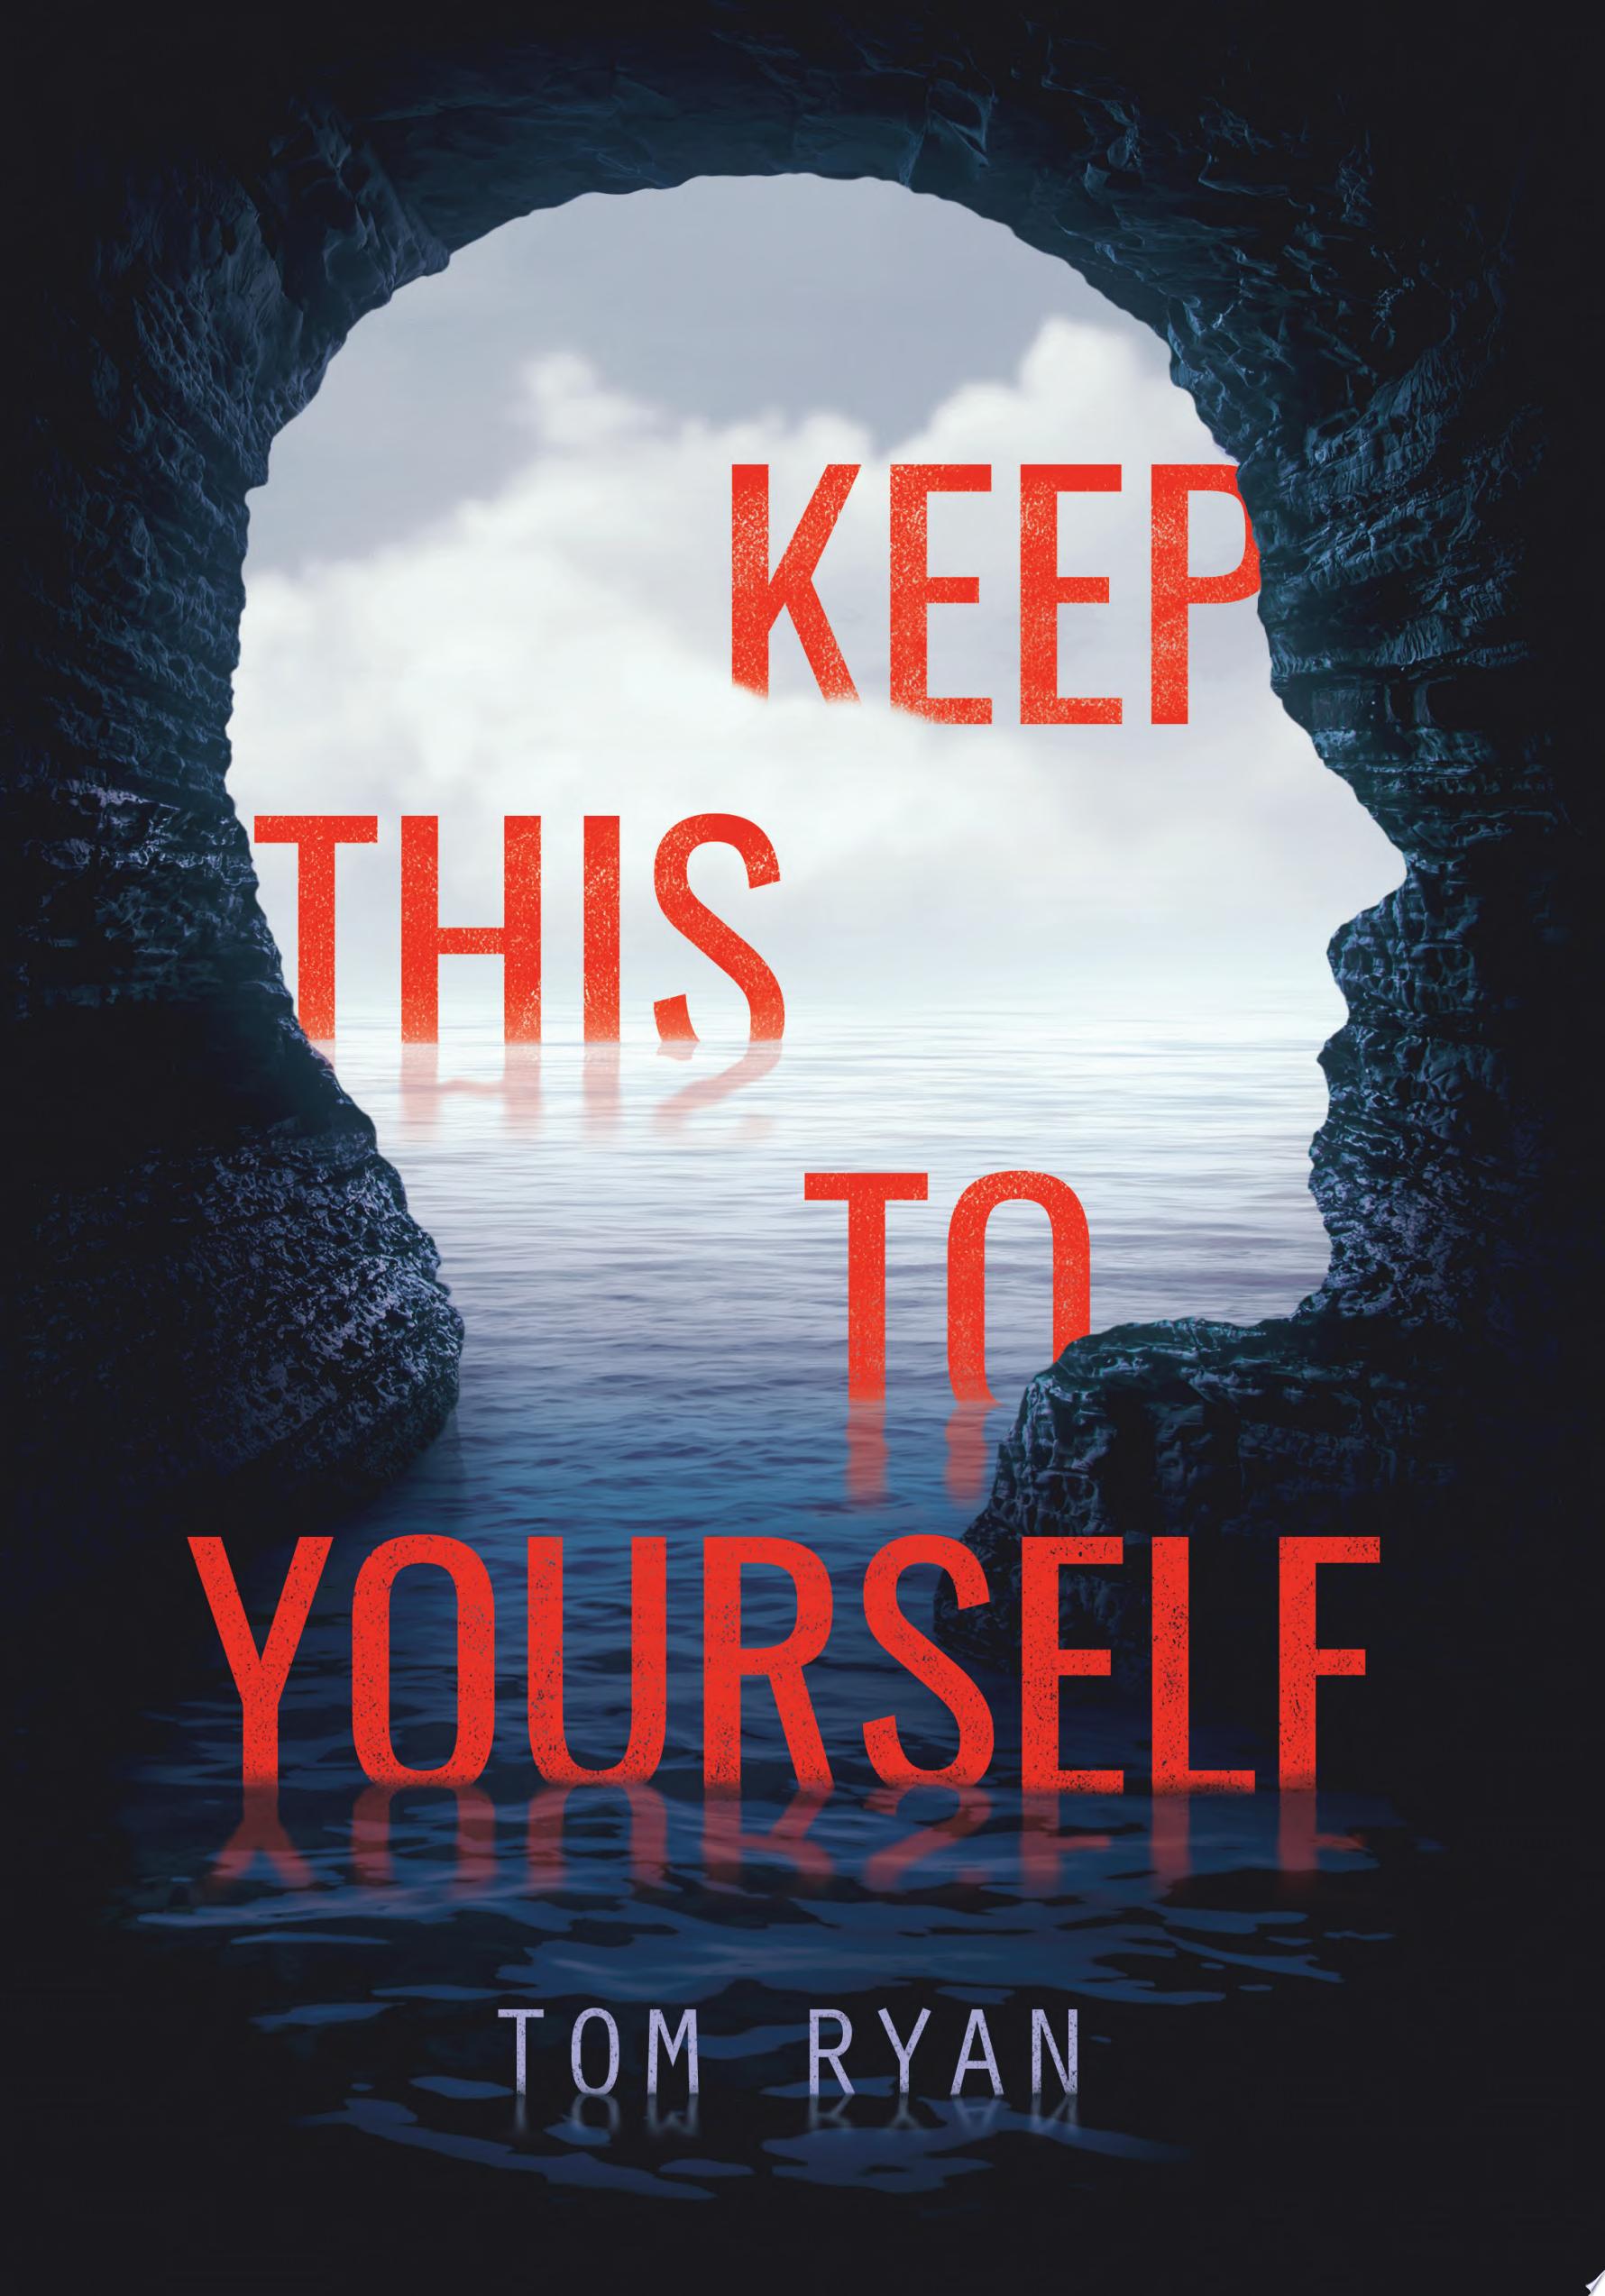 Image for "Keep This to Yourself"